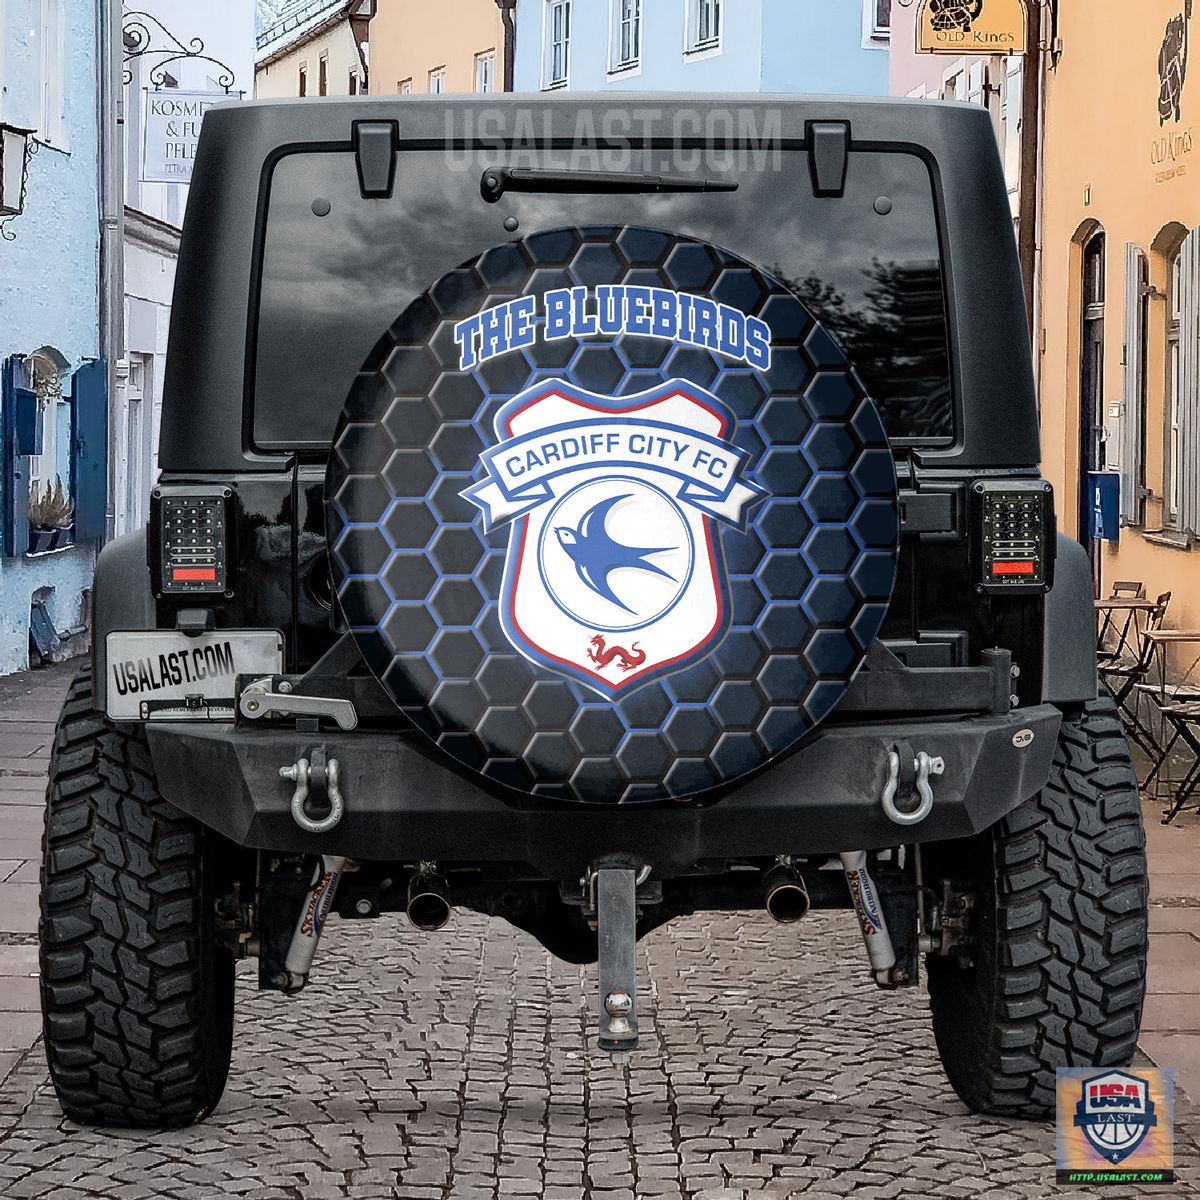 AMAZING Cardiff City FC Spare Tire Cover